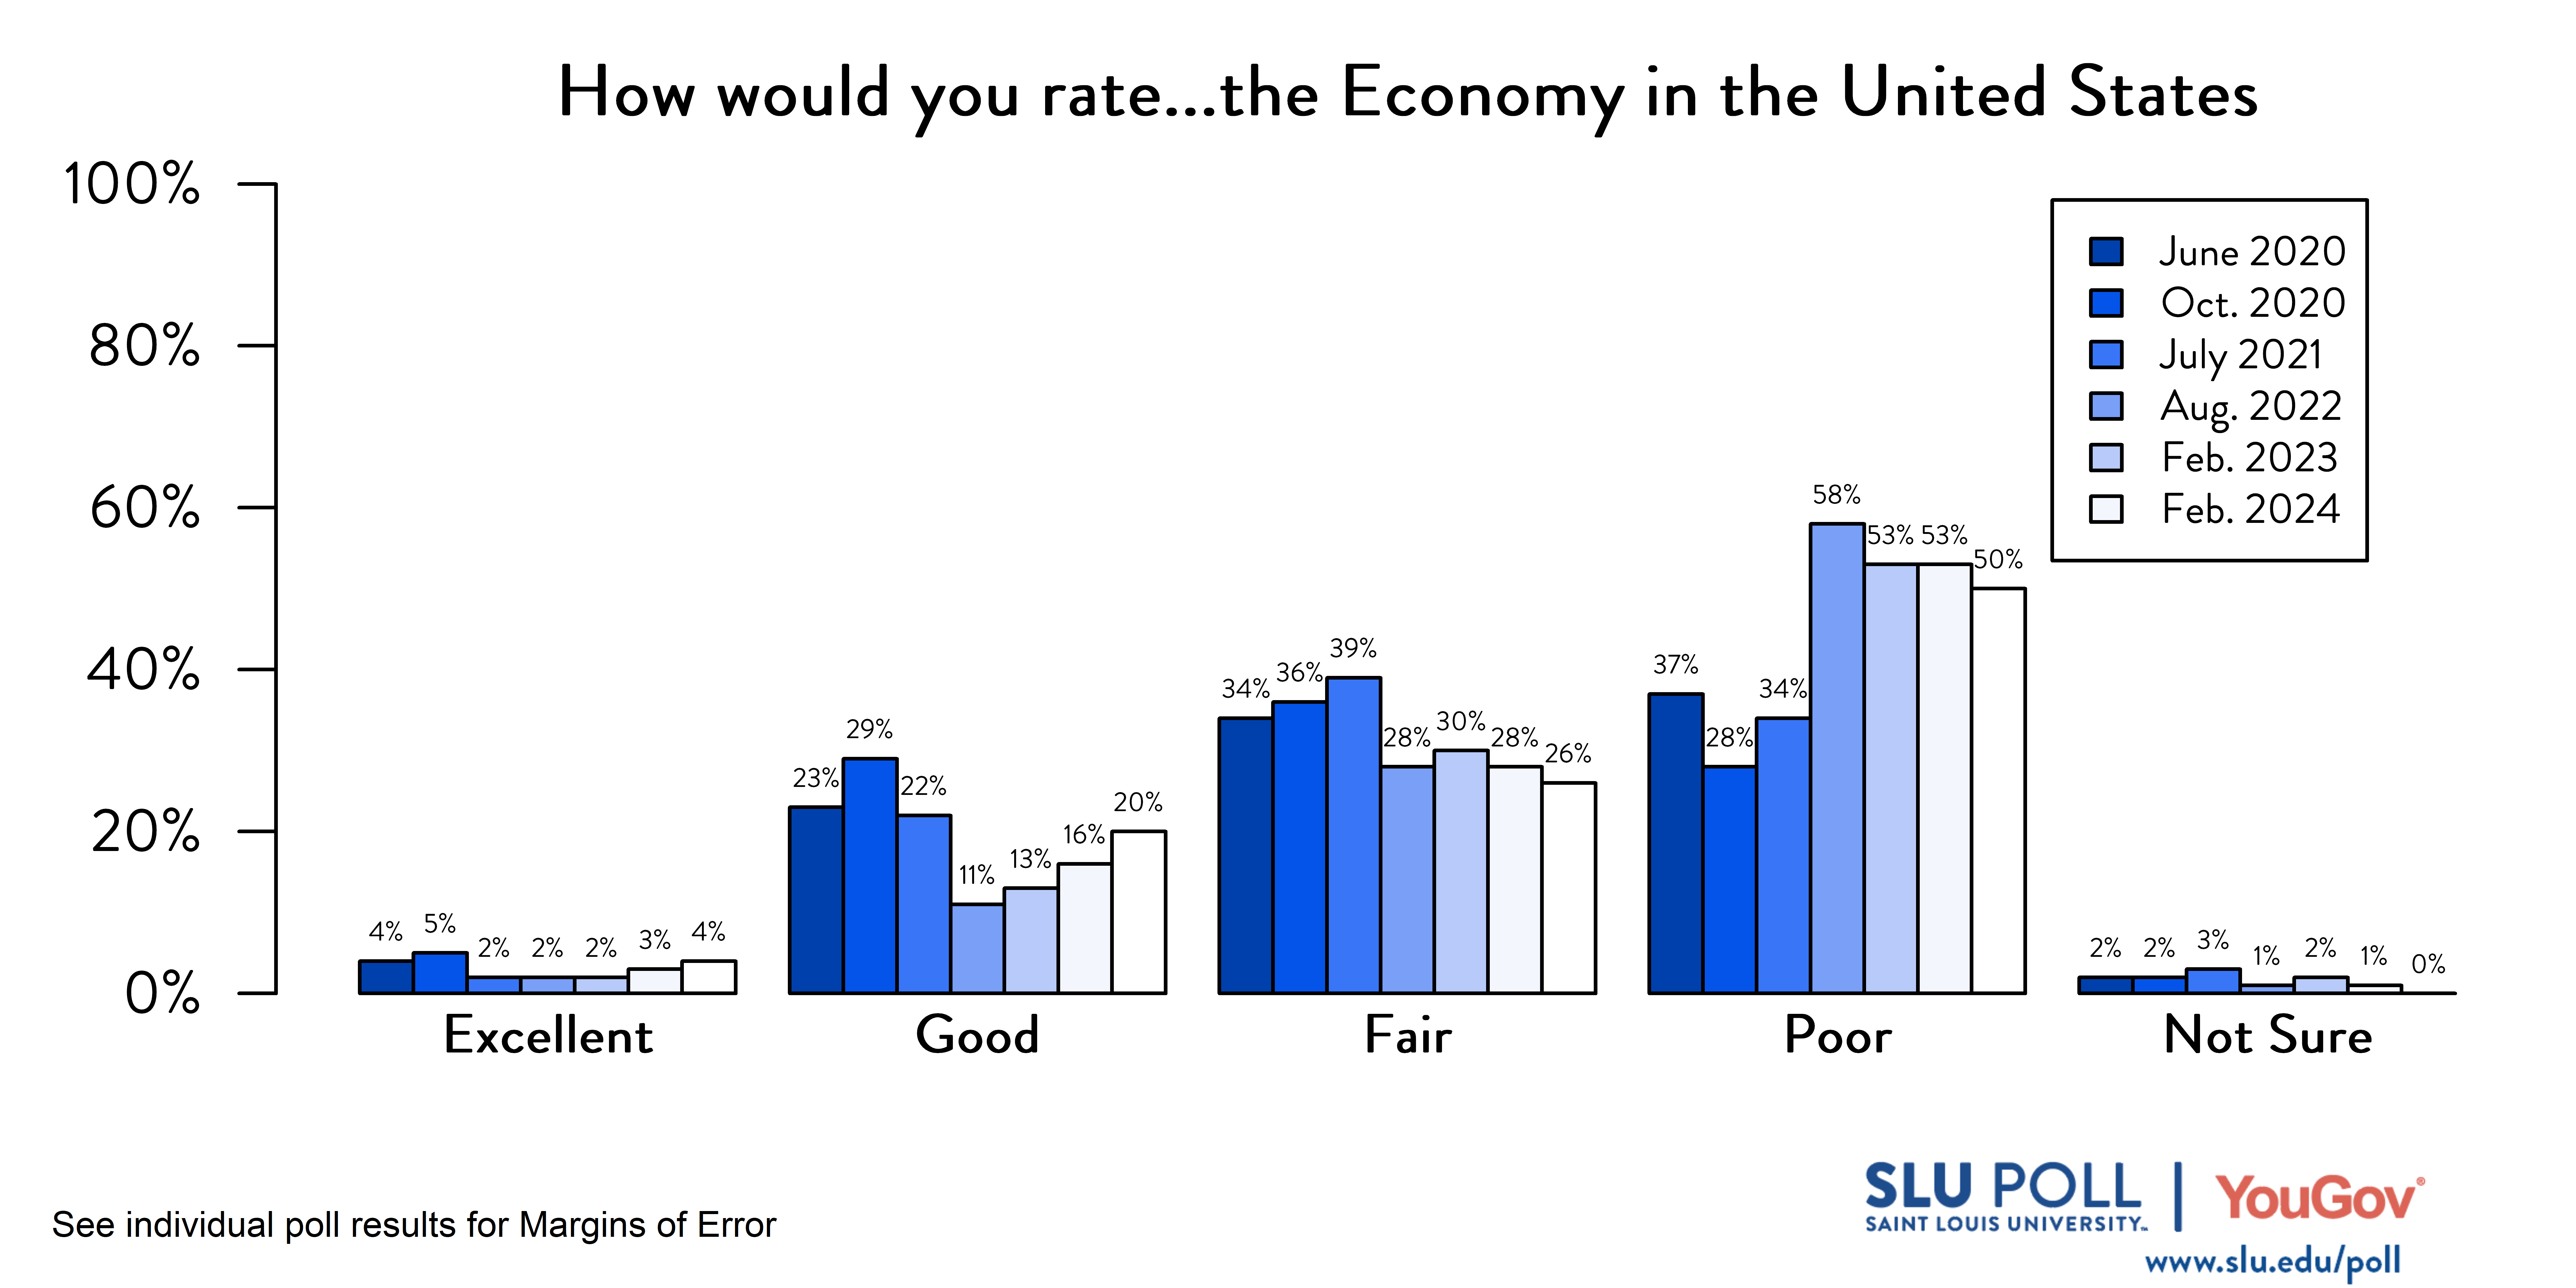 Likely voters' responses to 'How would you rate the condition of the following…The Economy in the United States?'. June 2020 Voter Responses 4% Excellent, 23% Good, 34% Fair, 37% Poor, and 2% Not Sure. October 2020 Voter Responses: 5% Excellent, 29% Good, 36% Fair, 28% Poor, and 2% Not sure. July 2021 Voter Responses: 2% Excellent, 22% Good, 39% Fair, 34% Poor, and 3% Not sure. August 2022 Voter Responses: 2% Excellent, 11% Good, 28% Fair, 58% Poor, and 1% Not sure. February 2023 Voter Responses: 2% Excellent, 13% Good, 30% Fair, 53% Poor, and 2% Not sure. February 2024 Voter Responses: 4% Excellent, 20% Good, 26% Fair, 50% Poor, and 0% Not sure.